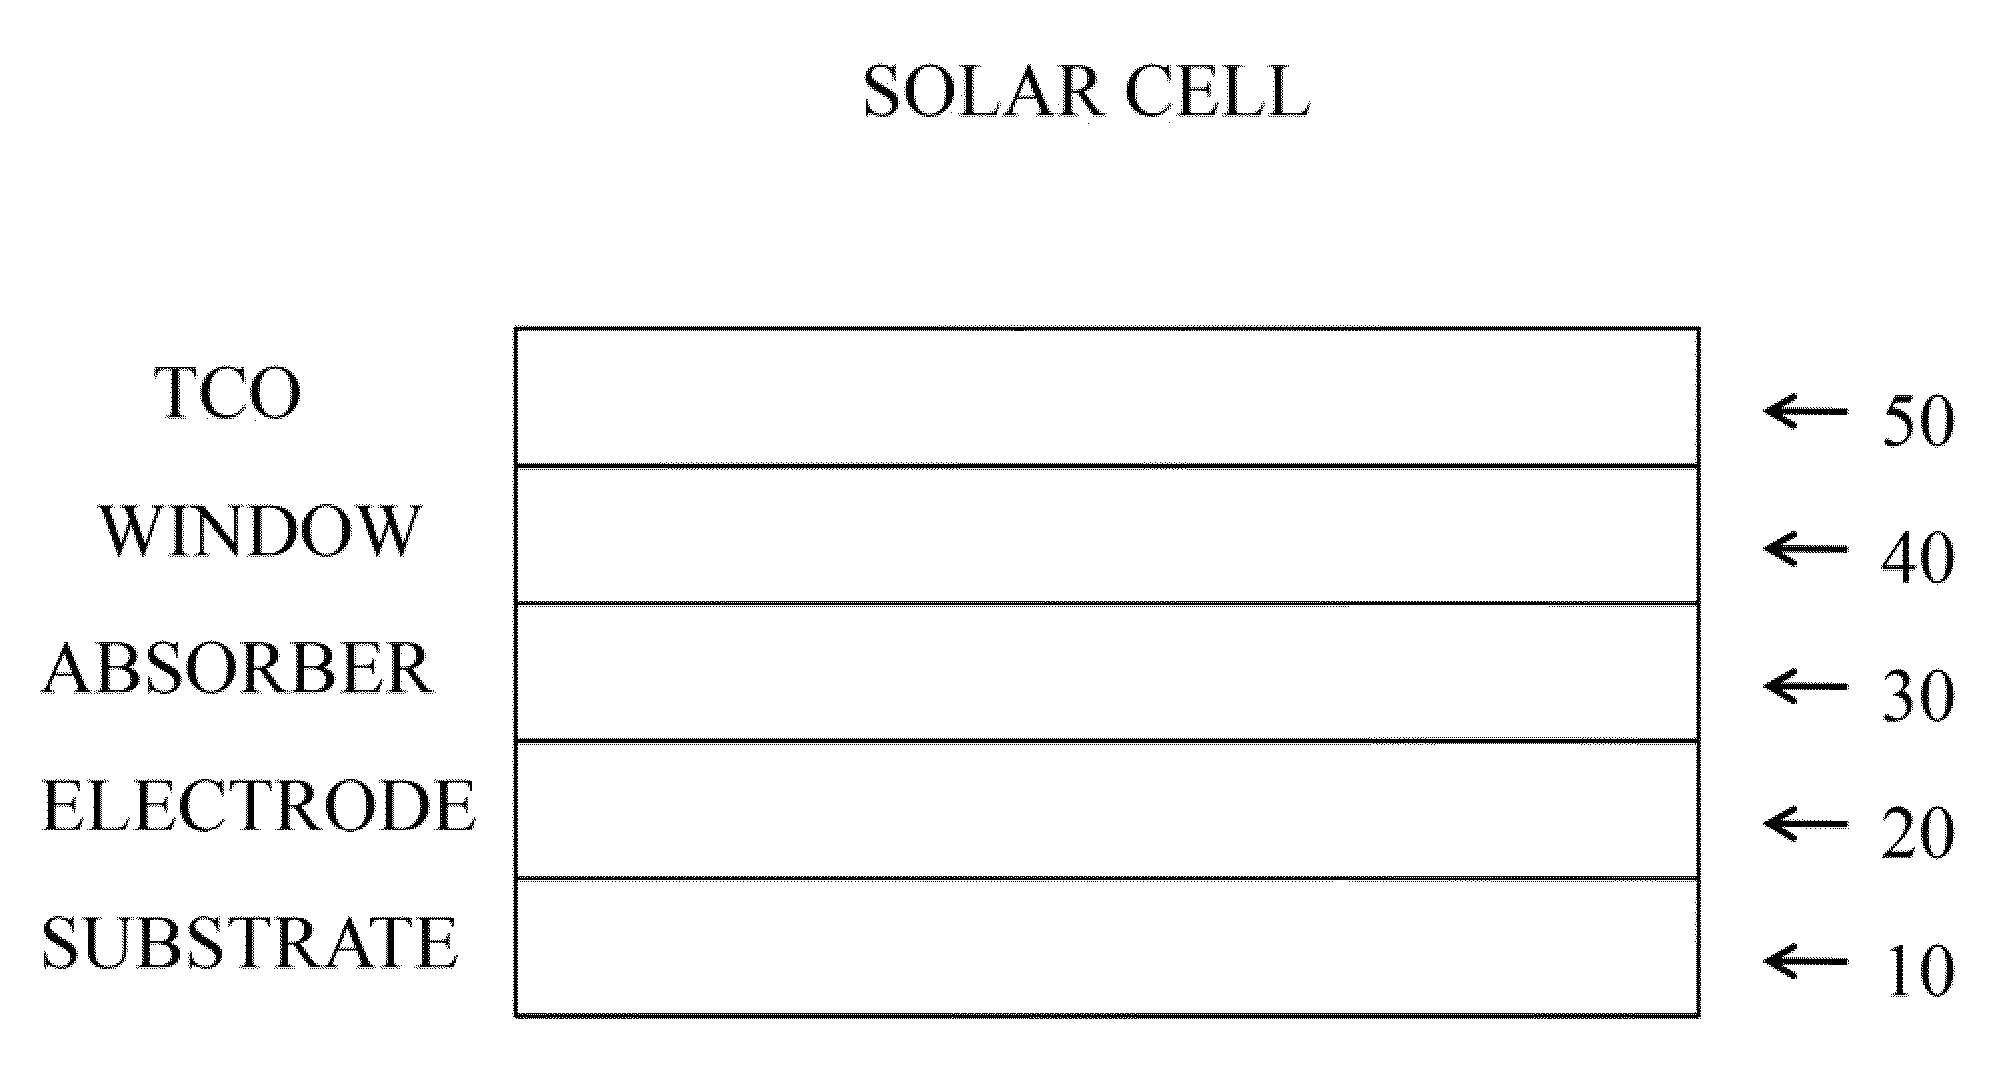 Methods for cis and cigs photovoltaics